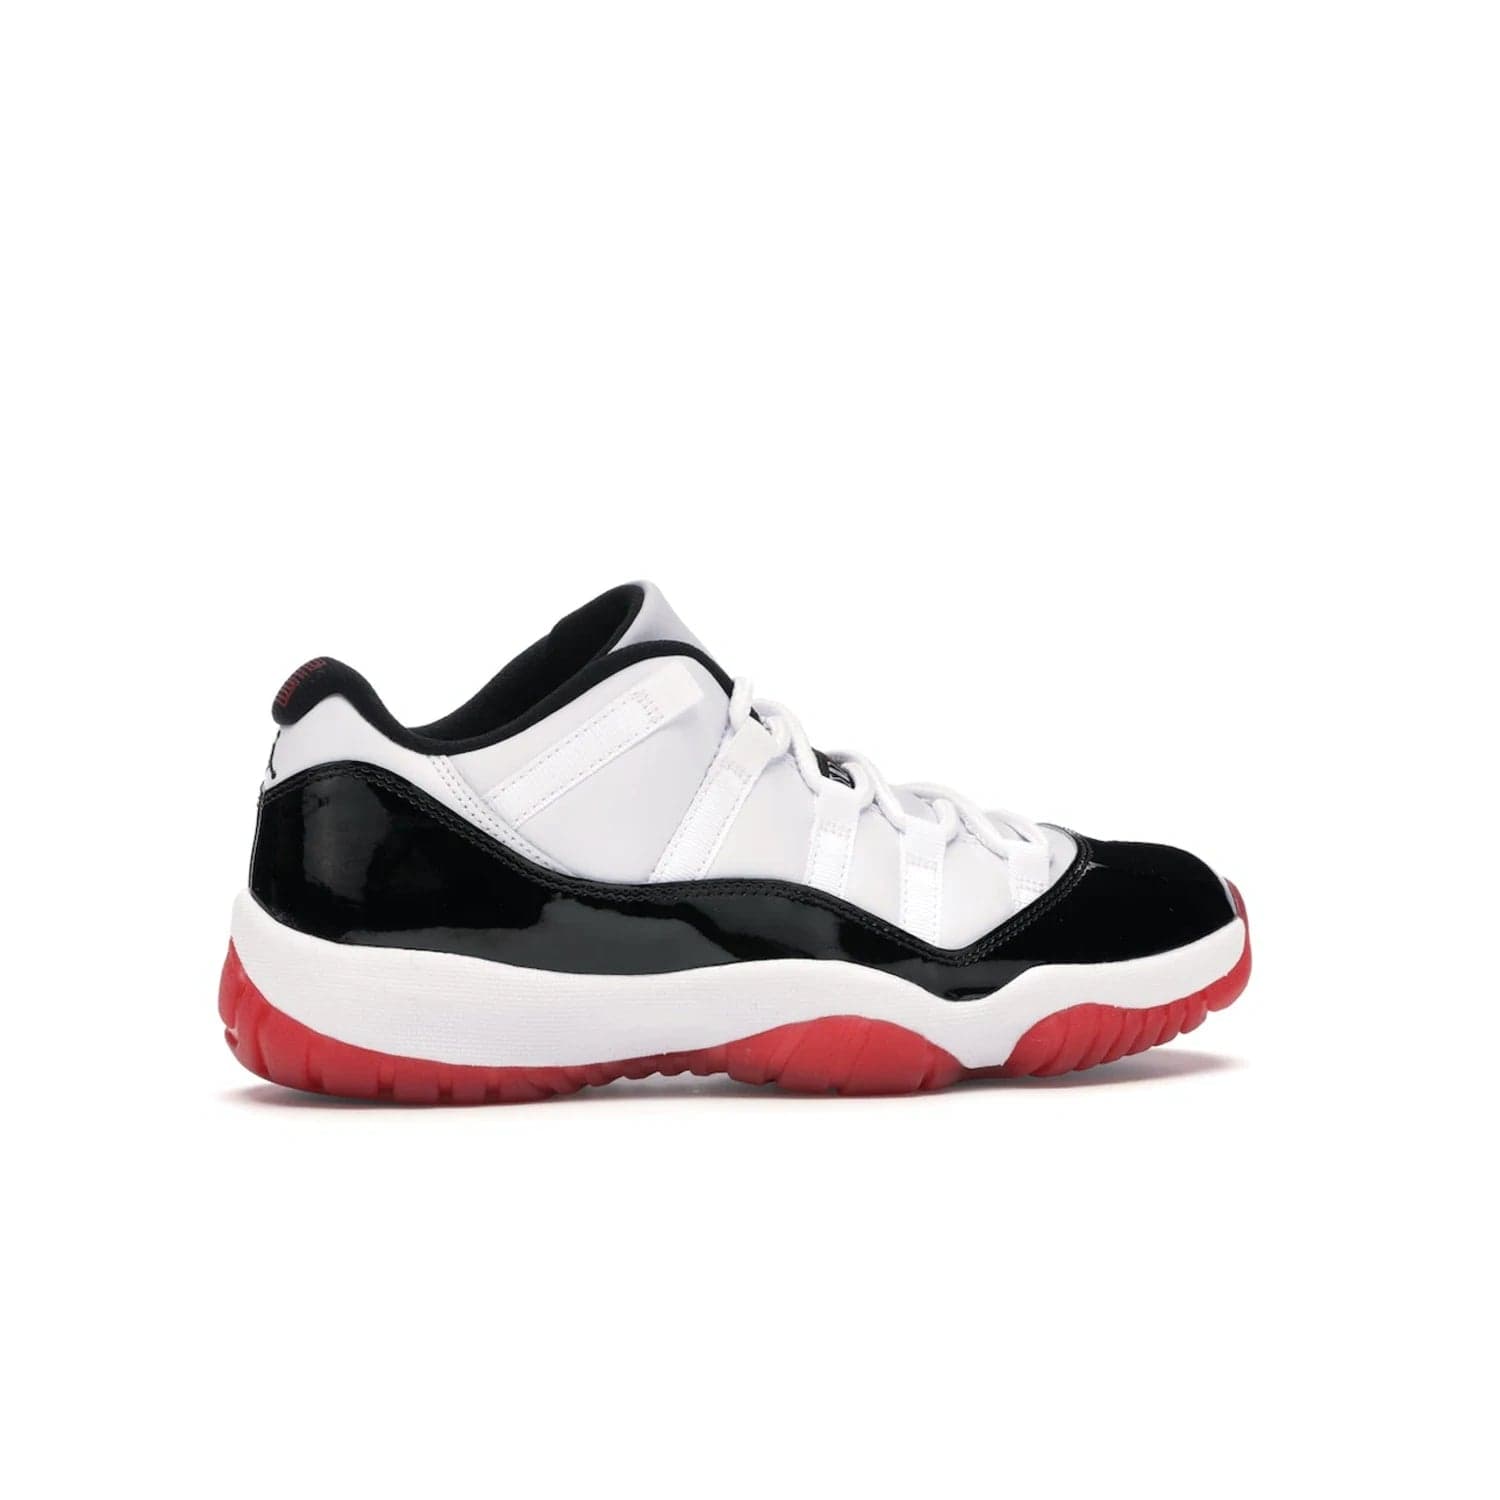 Jordan 11 Retro Low Concord Bred - Image 35 - Only at www.BallersClubKickz.com - Grab the classic Jordan 11 look with the Jordan 11 Retro Low Concord Bred. With white and black elements and the iconic red outsole of the Jordan 11 Bred, you won't miss a beat. Released in June 2020, the perfect complement to any outfit.